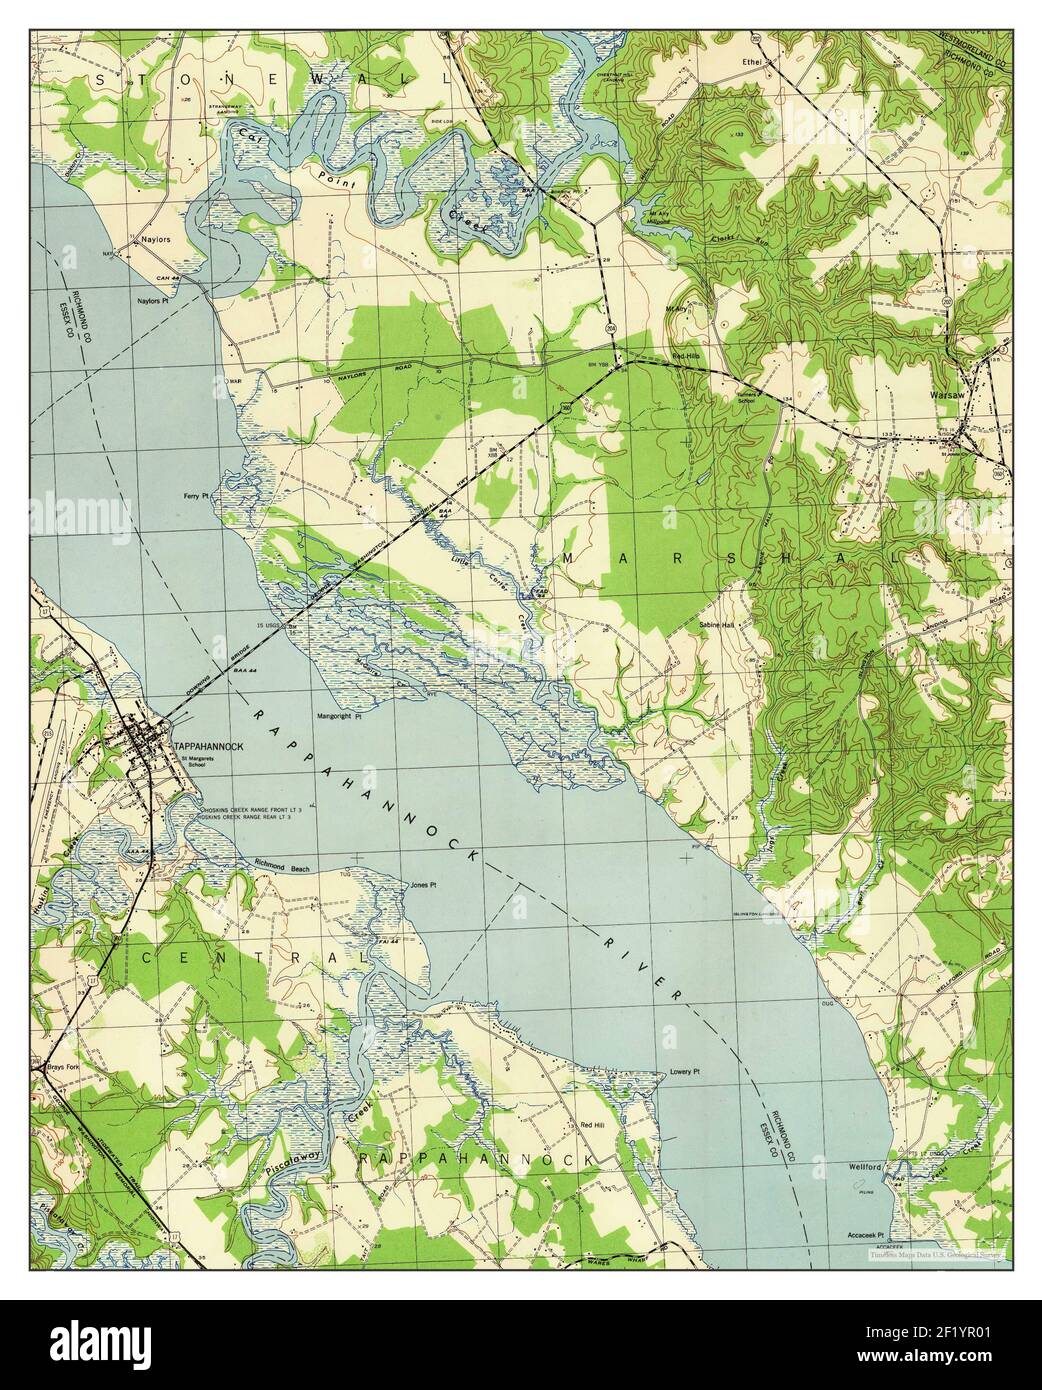 Tappahannock, Virginia, map 1944, 1:31680, United States of America by Timeless Maps, data U.S. Geological Survey Stock Photo